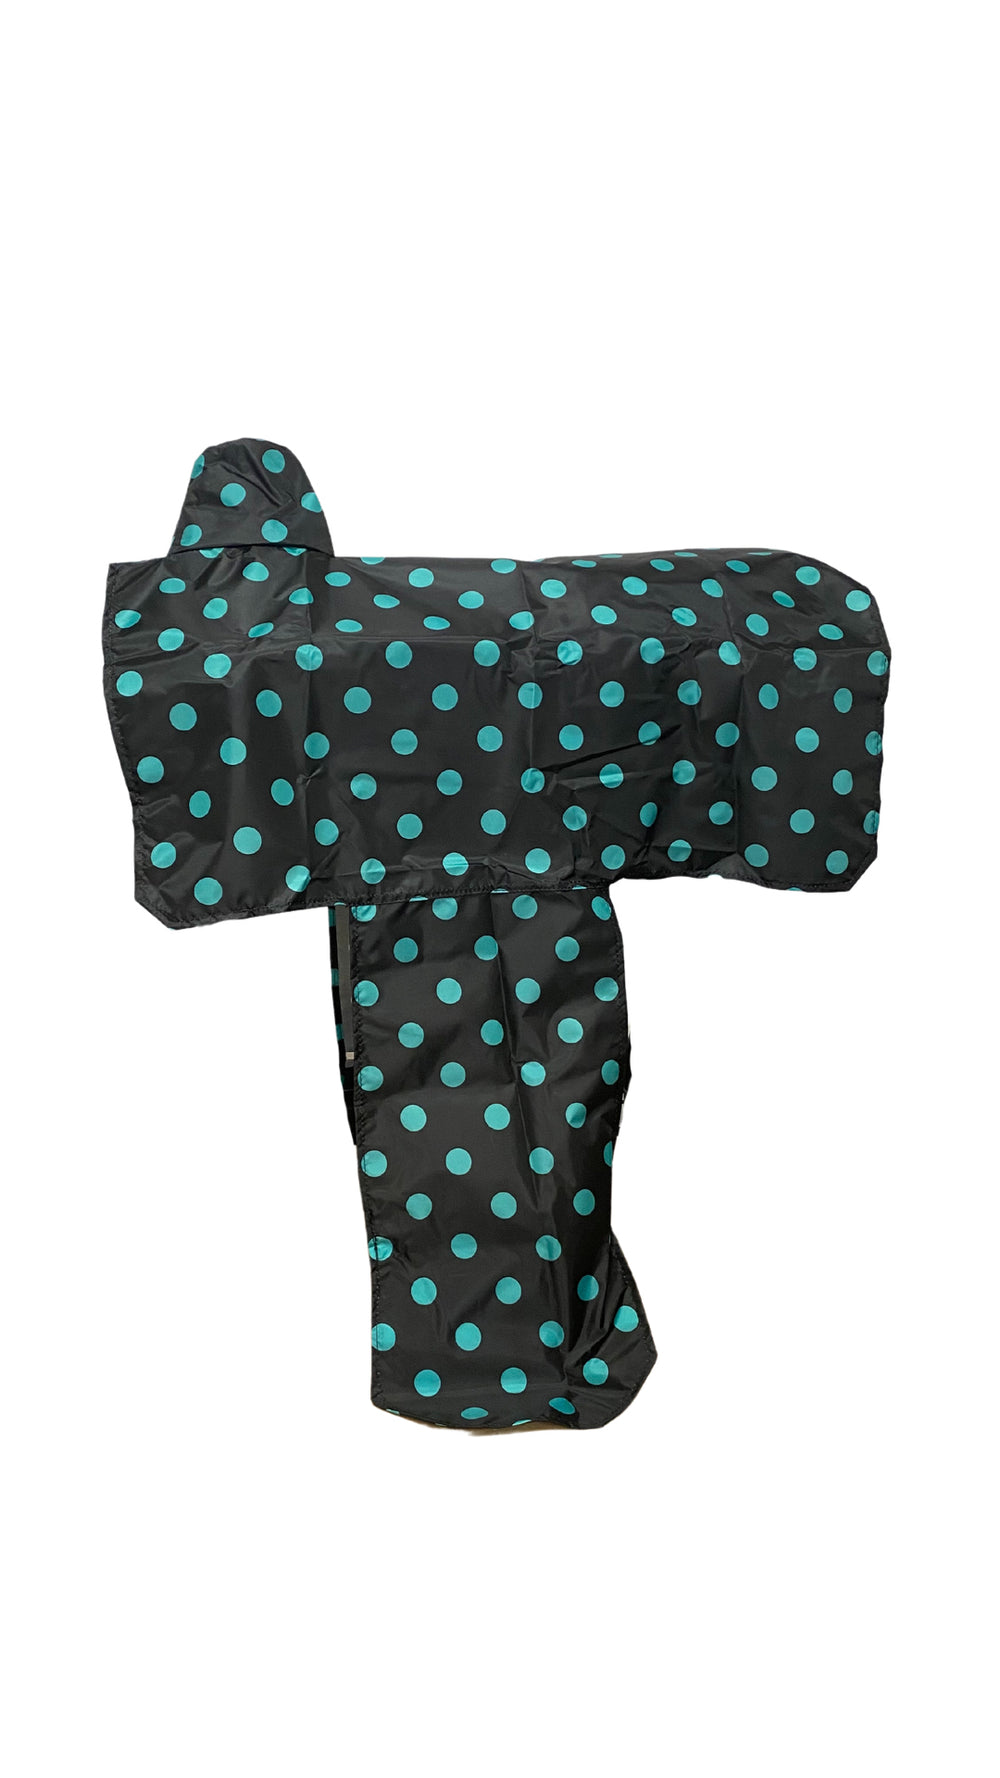 AJ Tack Black and Turquoise Western Saddle Cover